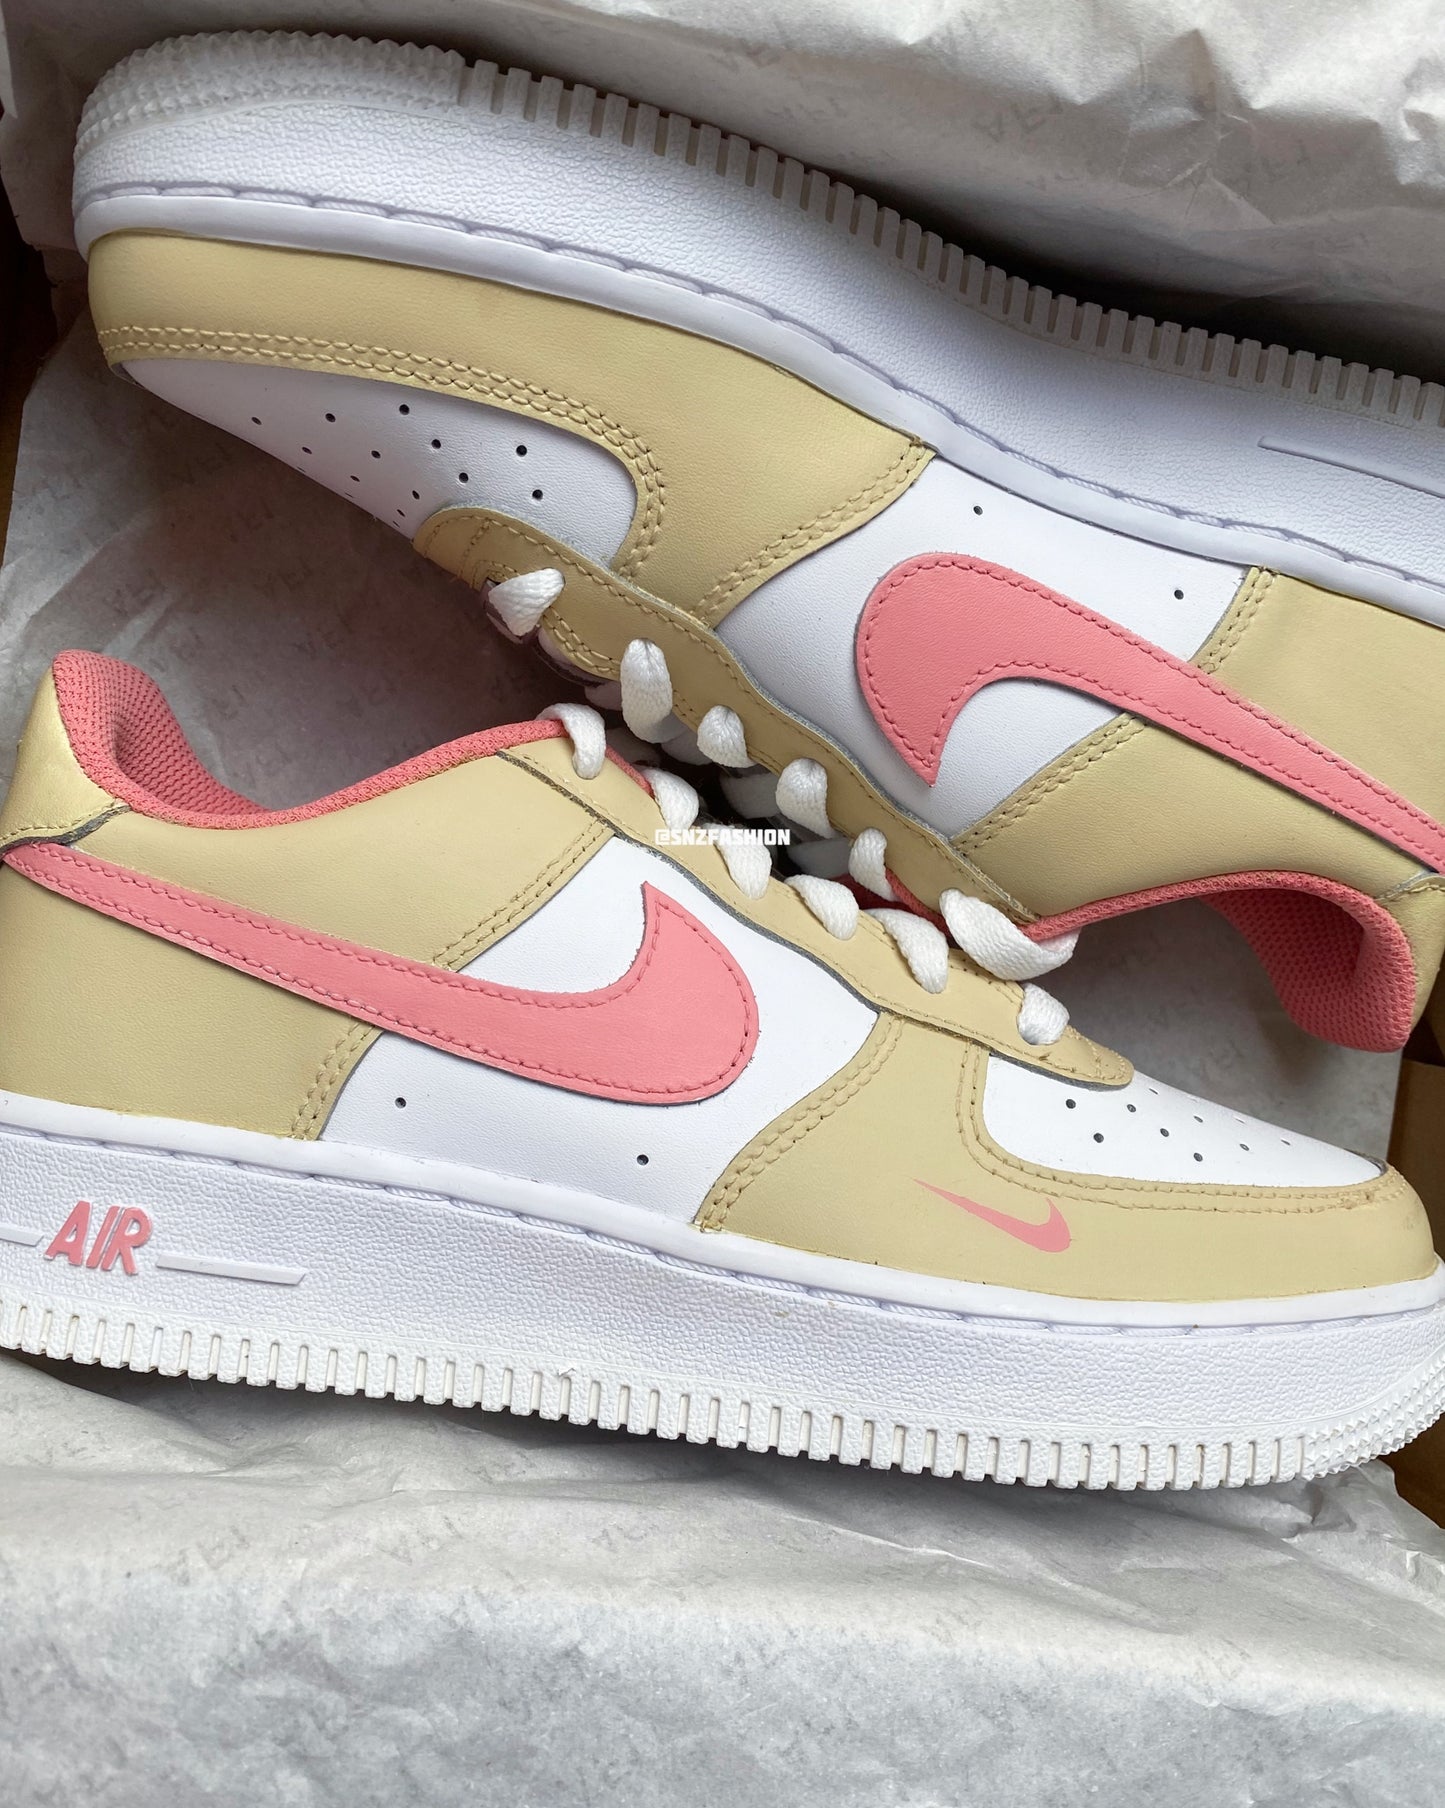 IN STOCK! STRAWBERRY COOKIES NIKE AIR FORCE 1(SIZE EU 37,5)